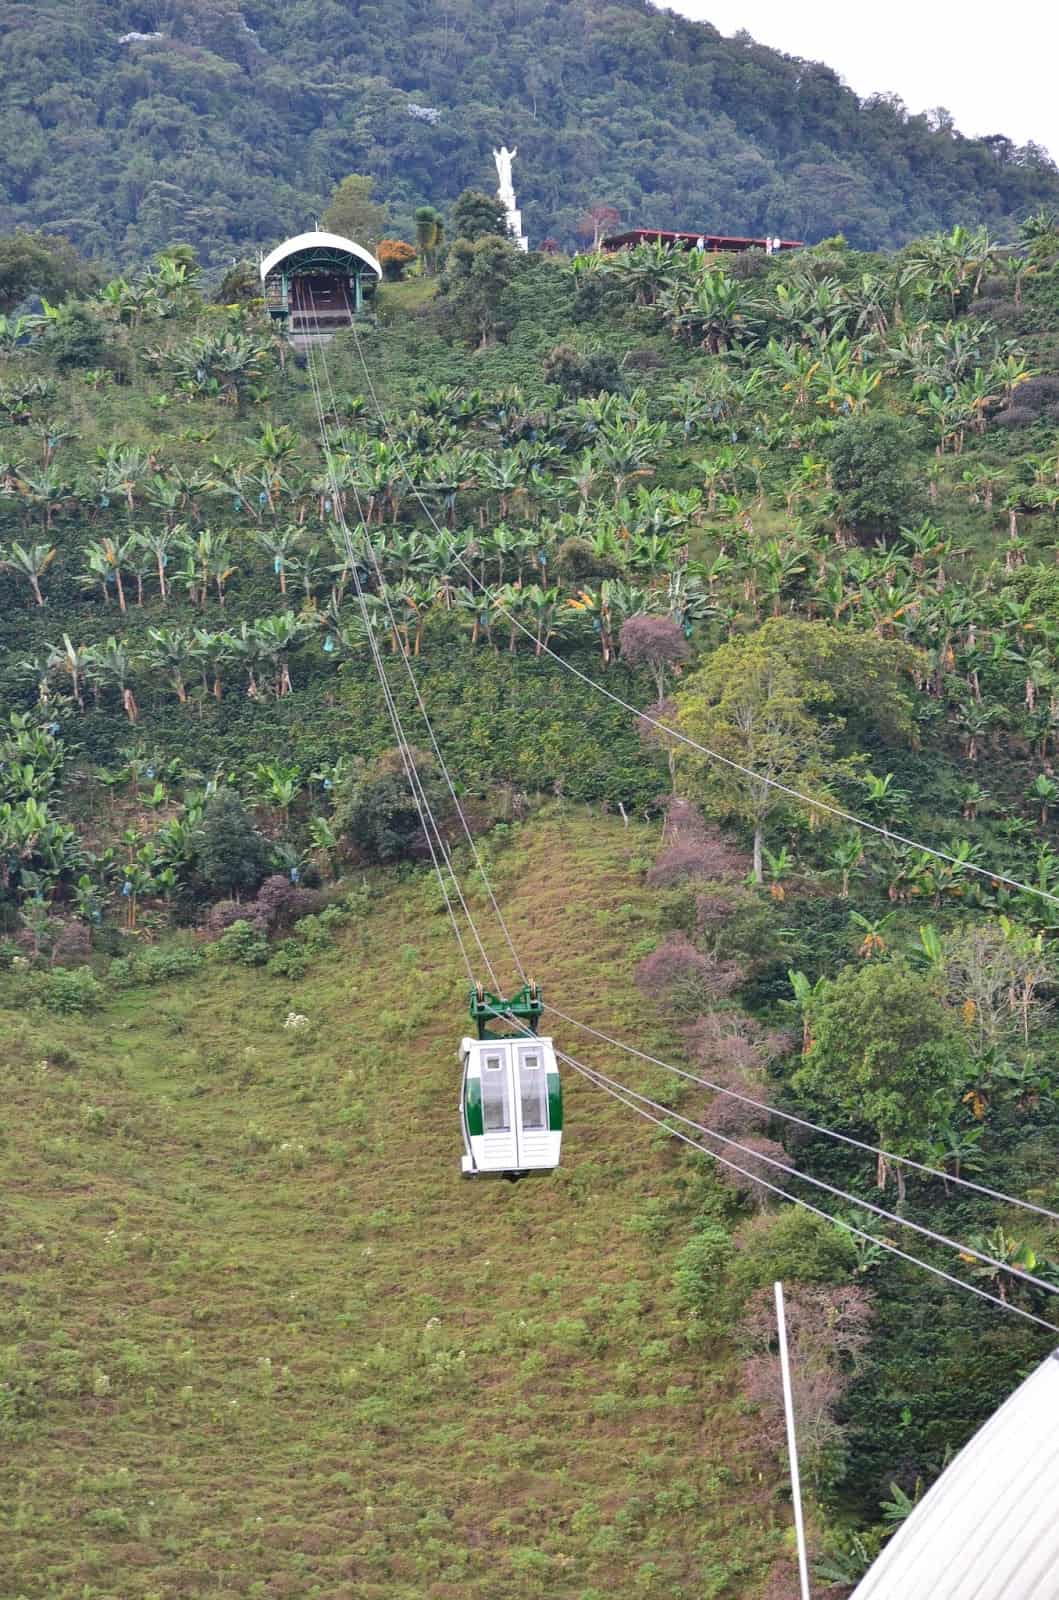 Cable car in July 2015 in Jardín, Antioquia, Colombia